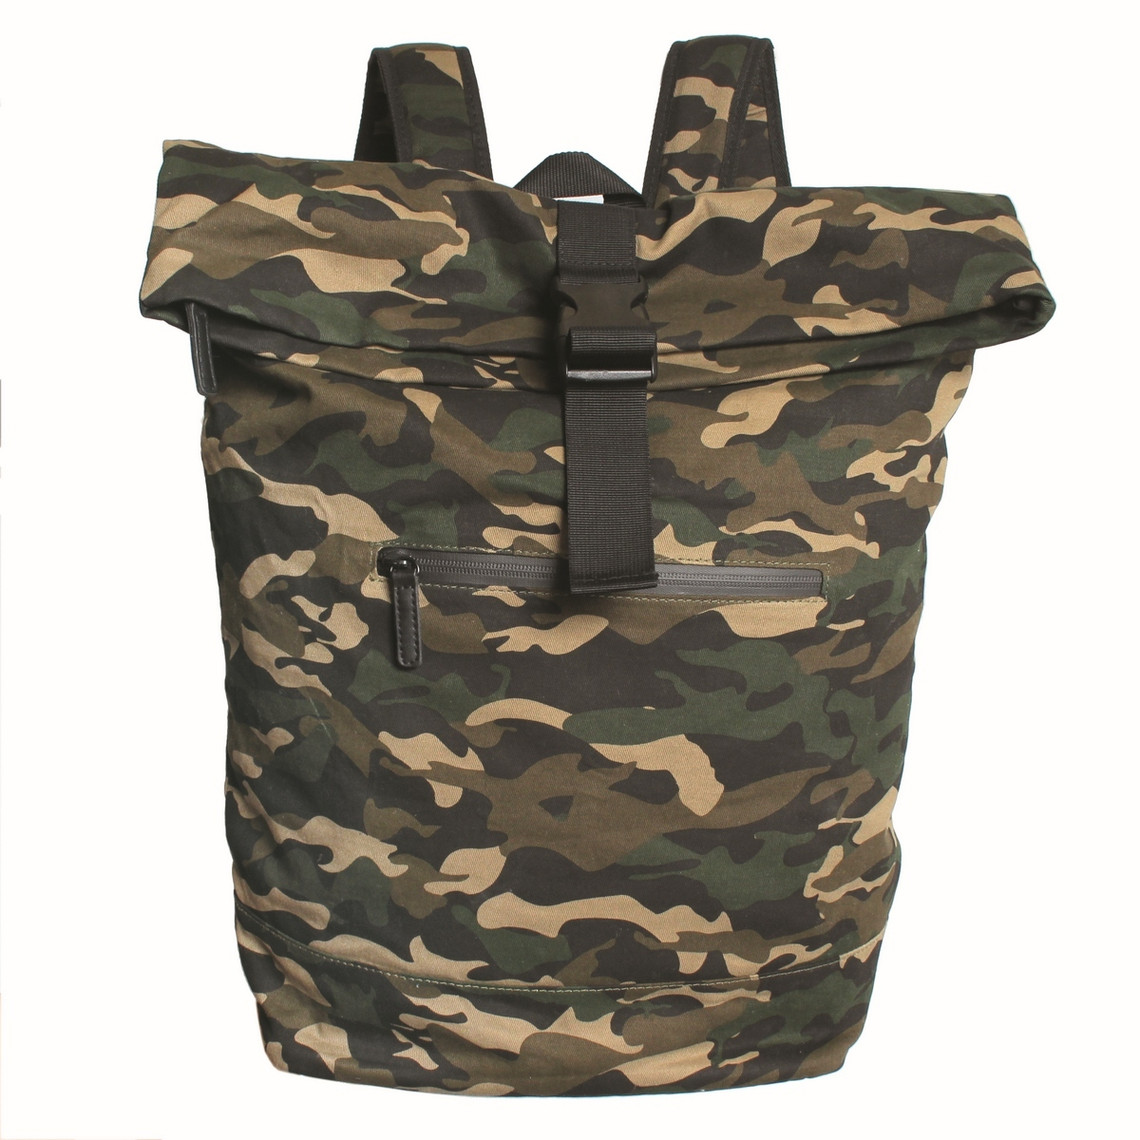 Sac A Dos Army Camouflage